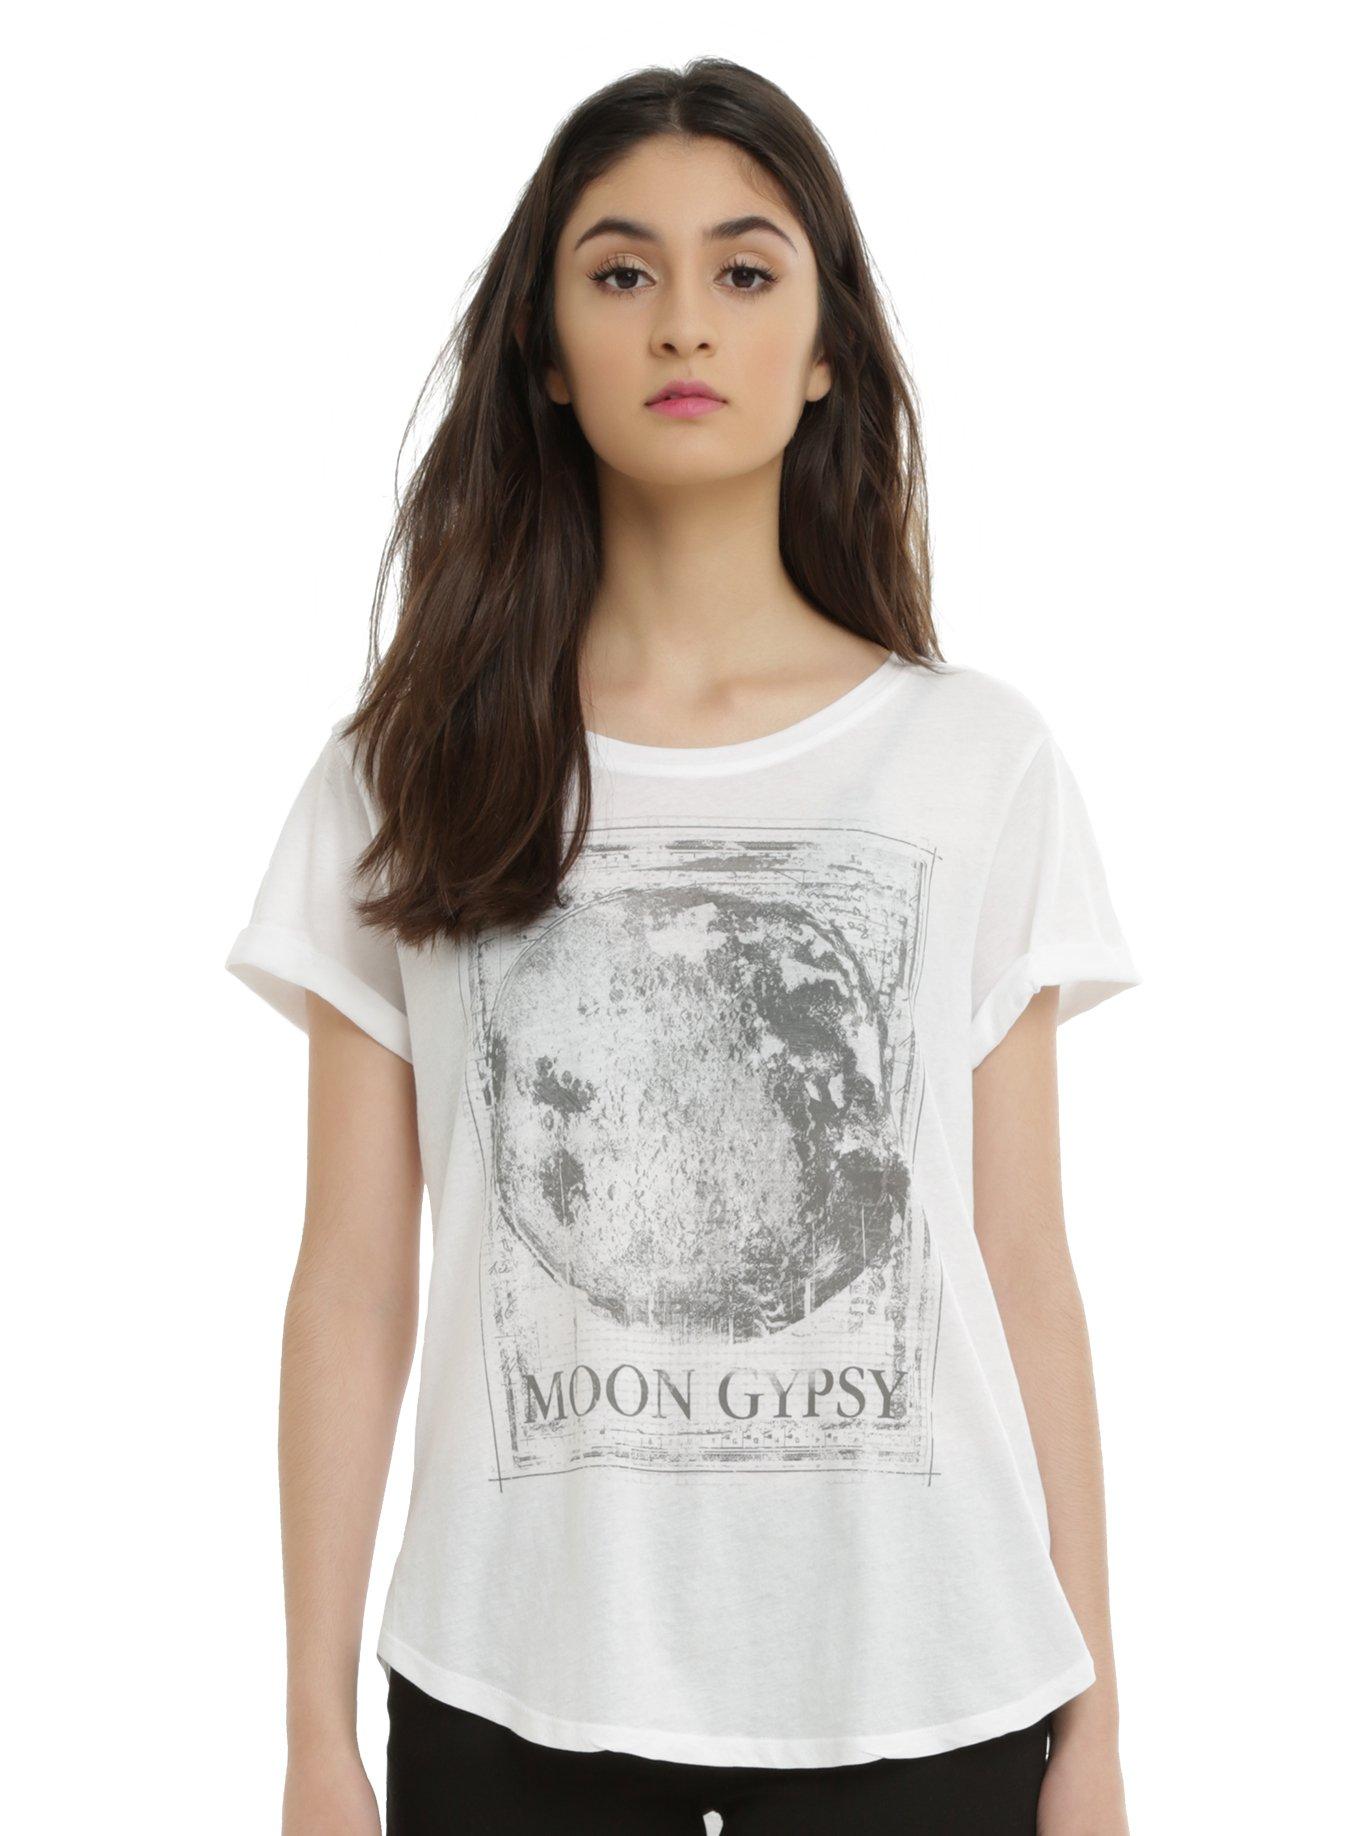 Moon Gypsy Rolled Sleeve T-Shirt | Hot Topic